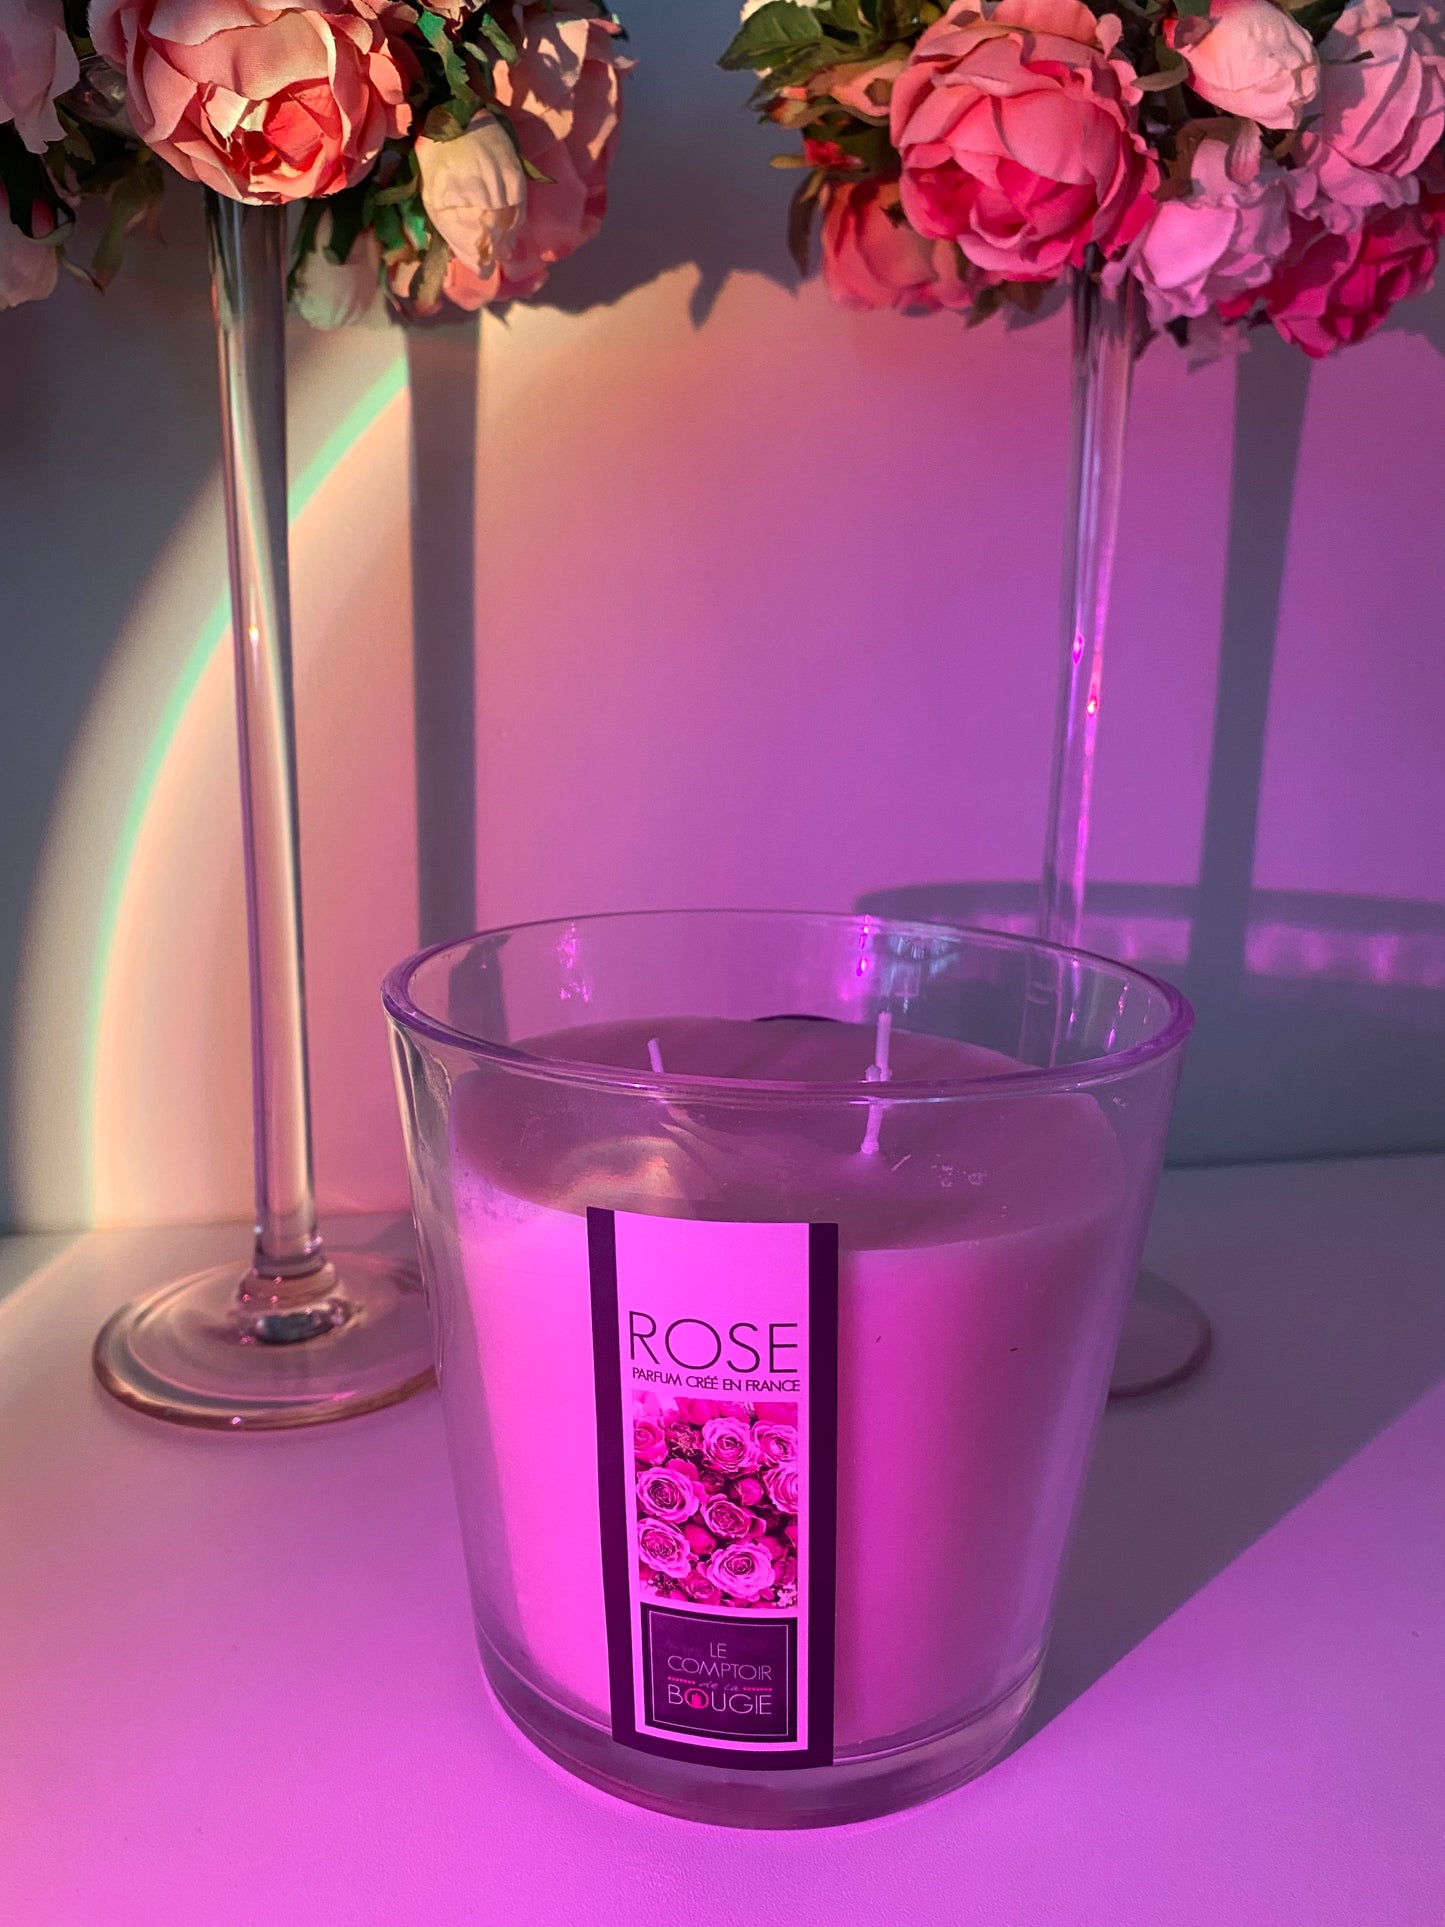 Scented candle with rose aroma, 500g